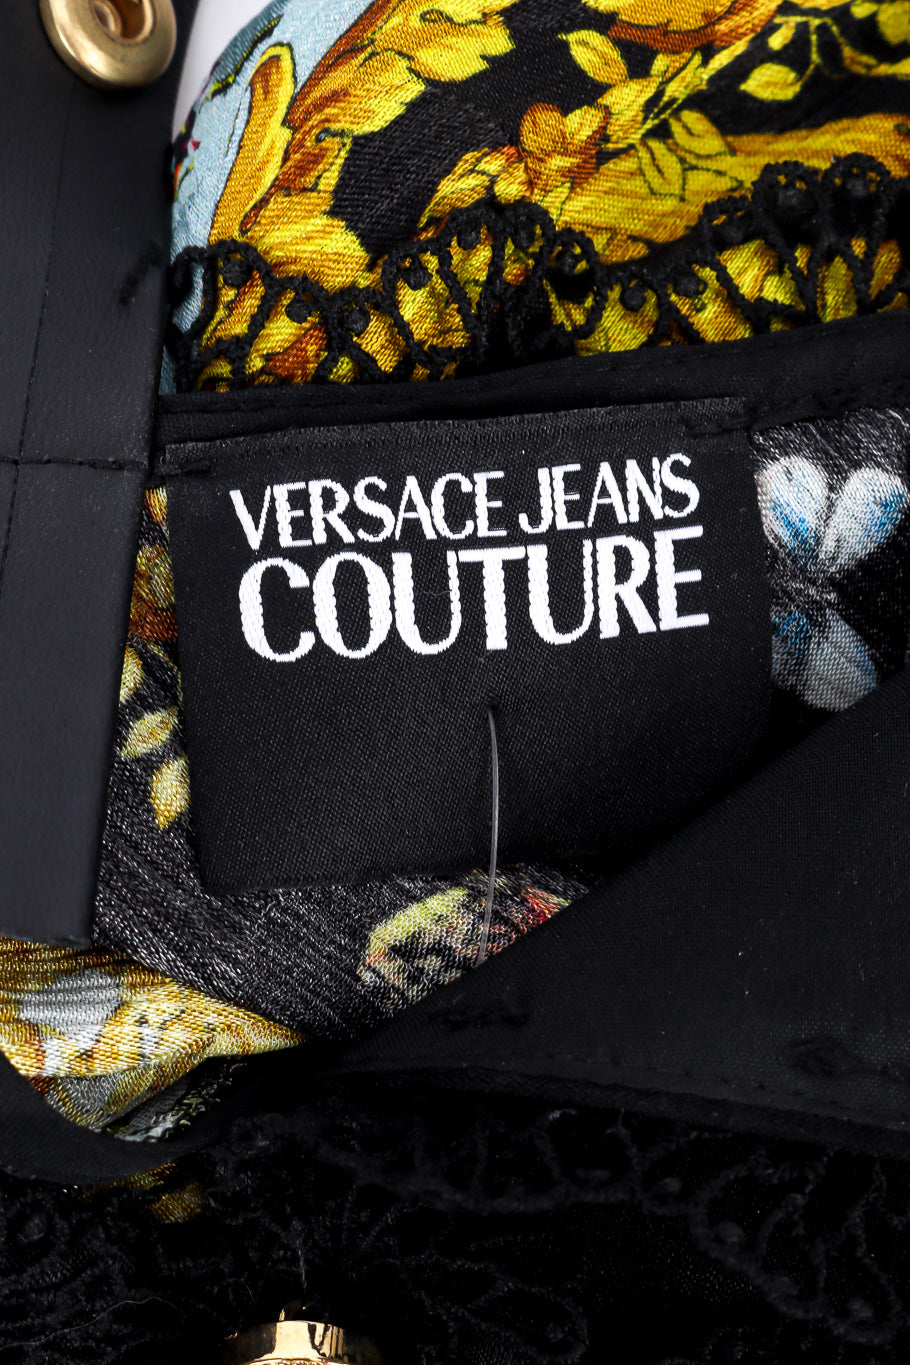 Printed mini dress by Versace Jeans Couture label @recessla